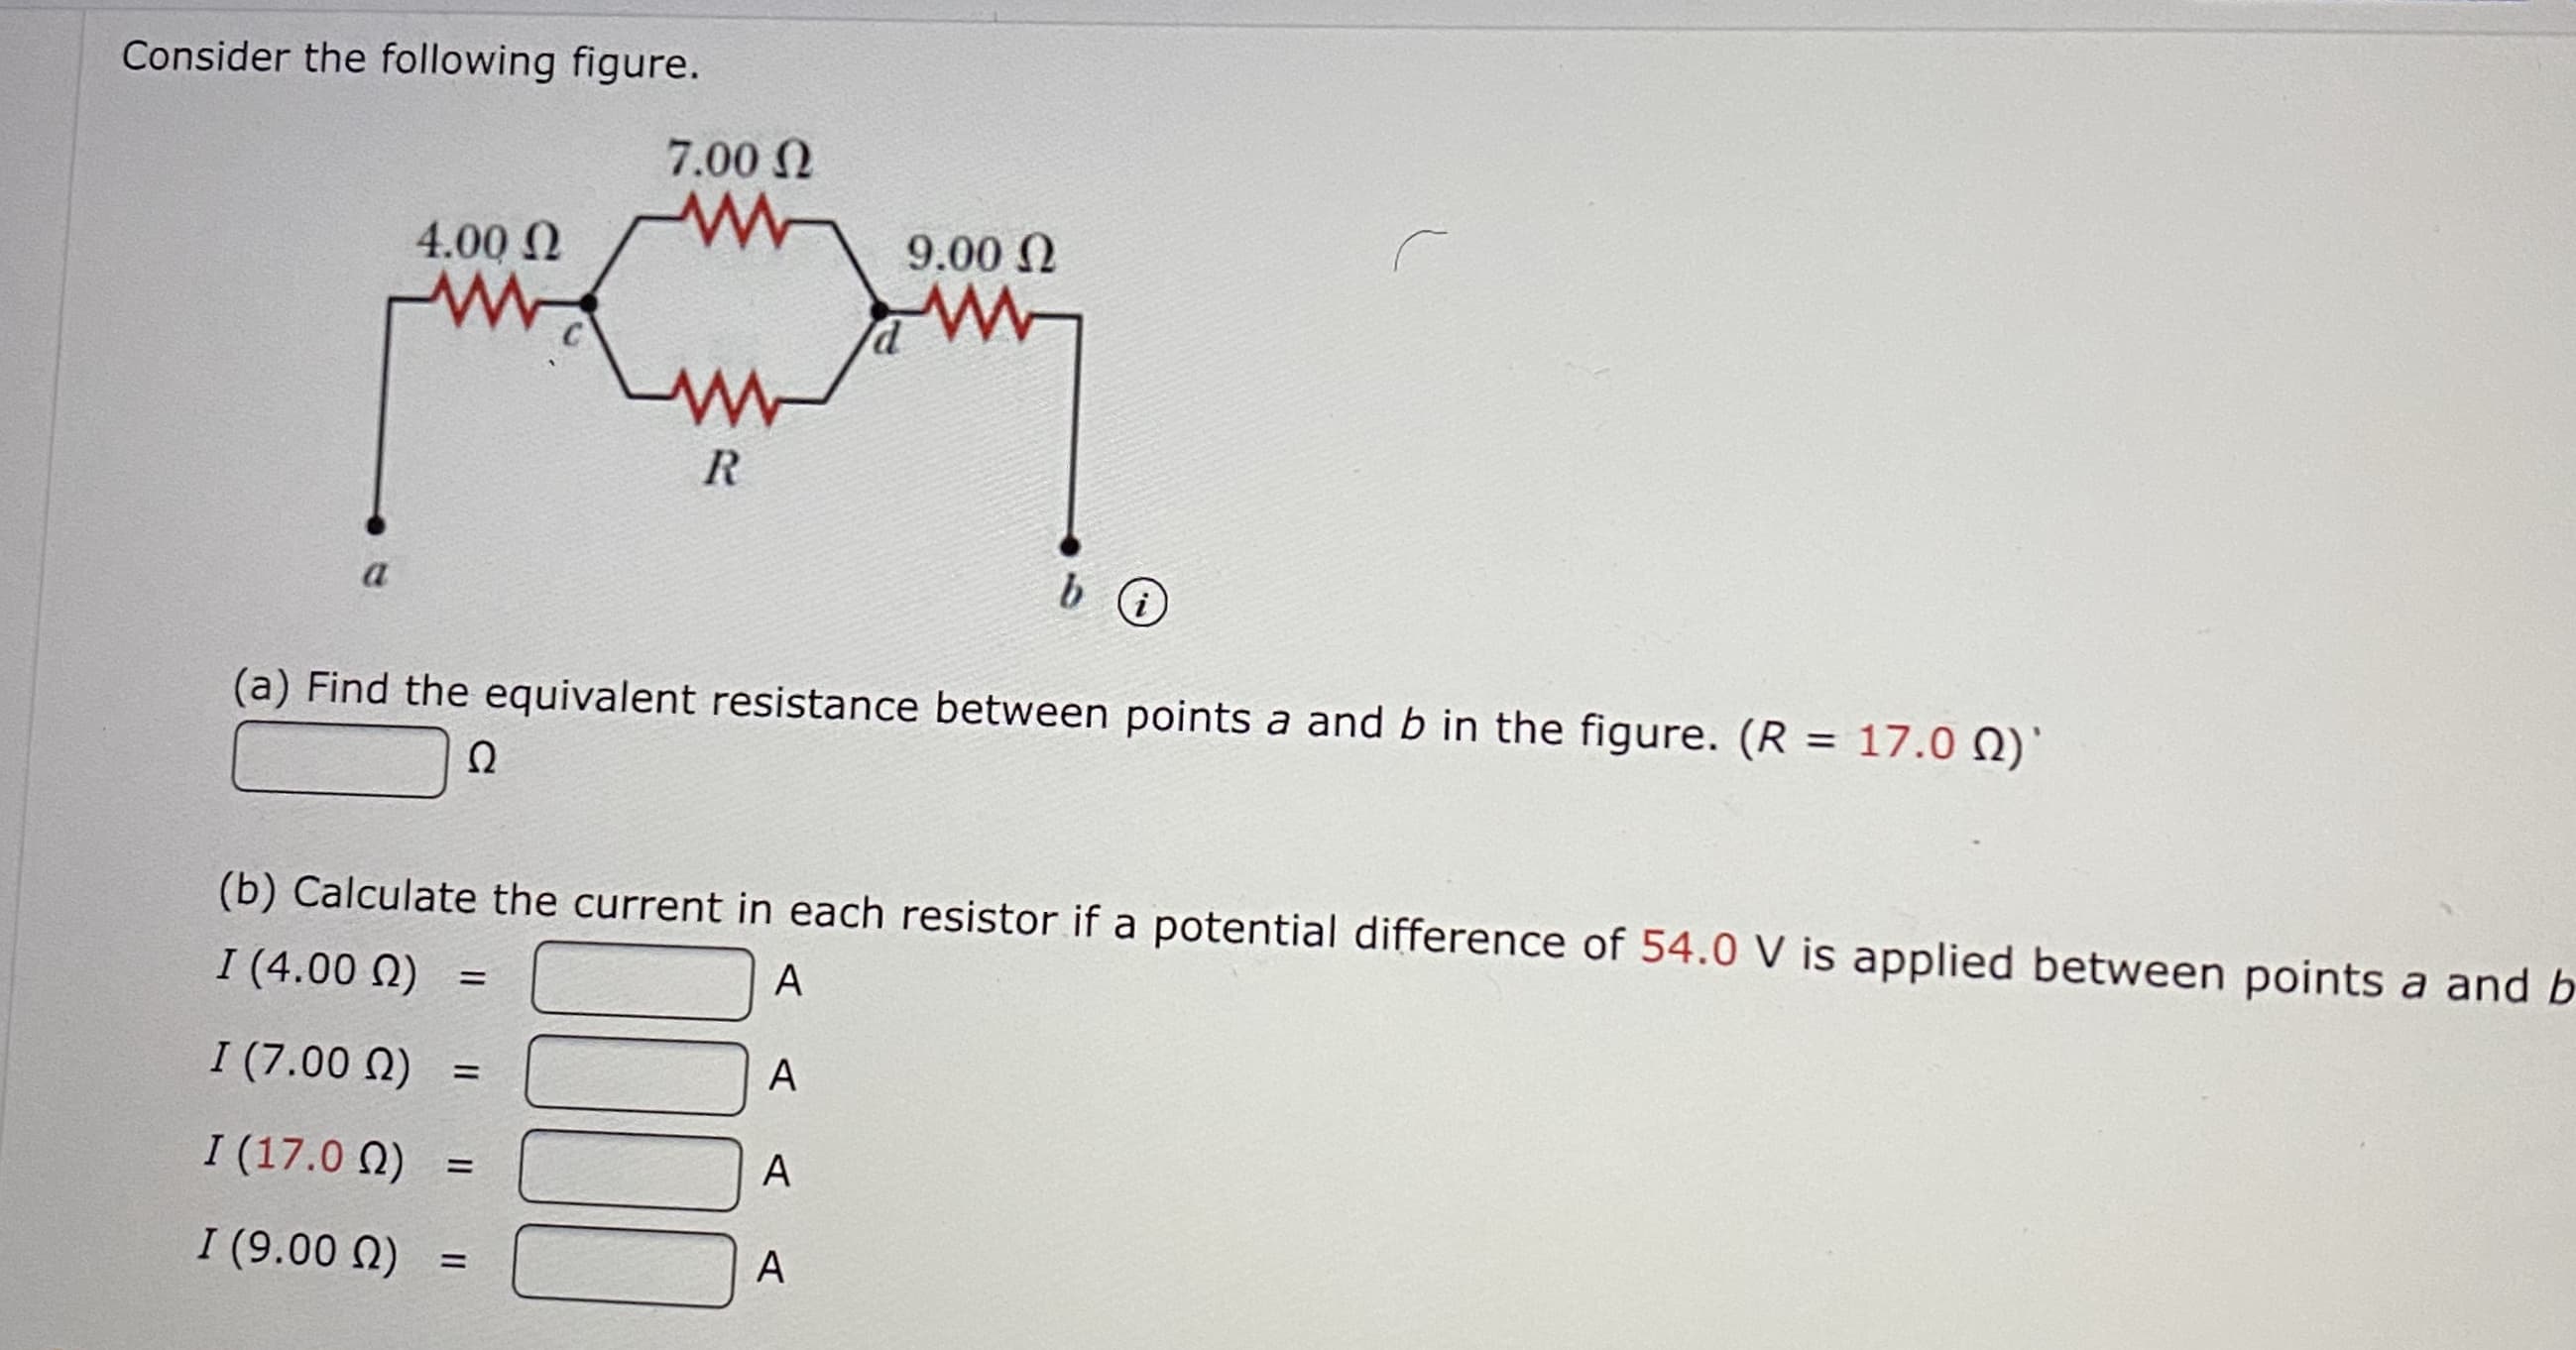 Consider the following figure.
7.00 N
4.00 N
9.00 N
C
R
a
(a) Find the equivalent resistance between points a and b in the figure. (R = 17.0 )
%3D
Ω
(b) Calculate the current in each resistor if a potential difference of 54.0 V is applied between points a and E
I (4.00 N)
A
I (7.00 N)
A
%3D
I (17.0 N)
A
I (9.00 N)
A
